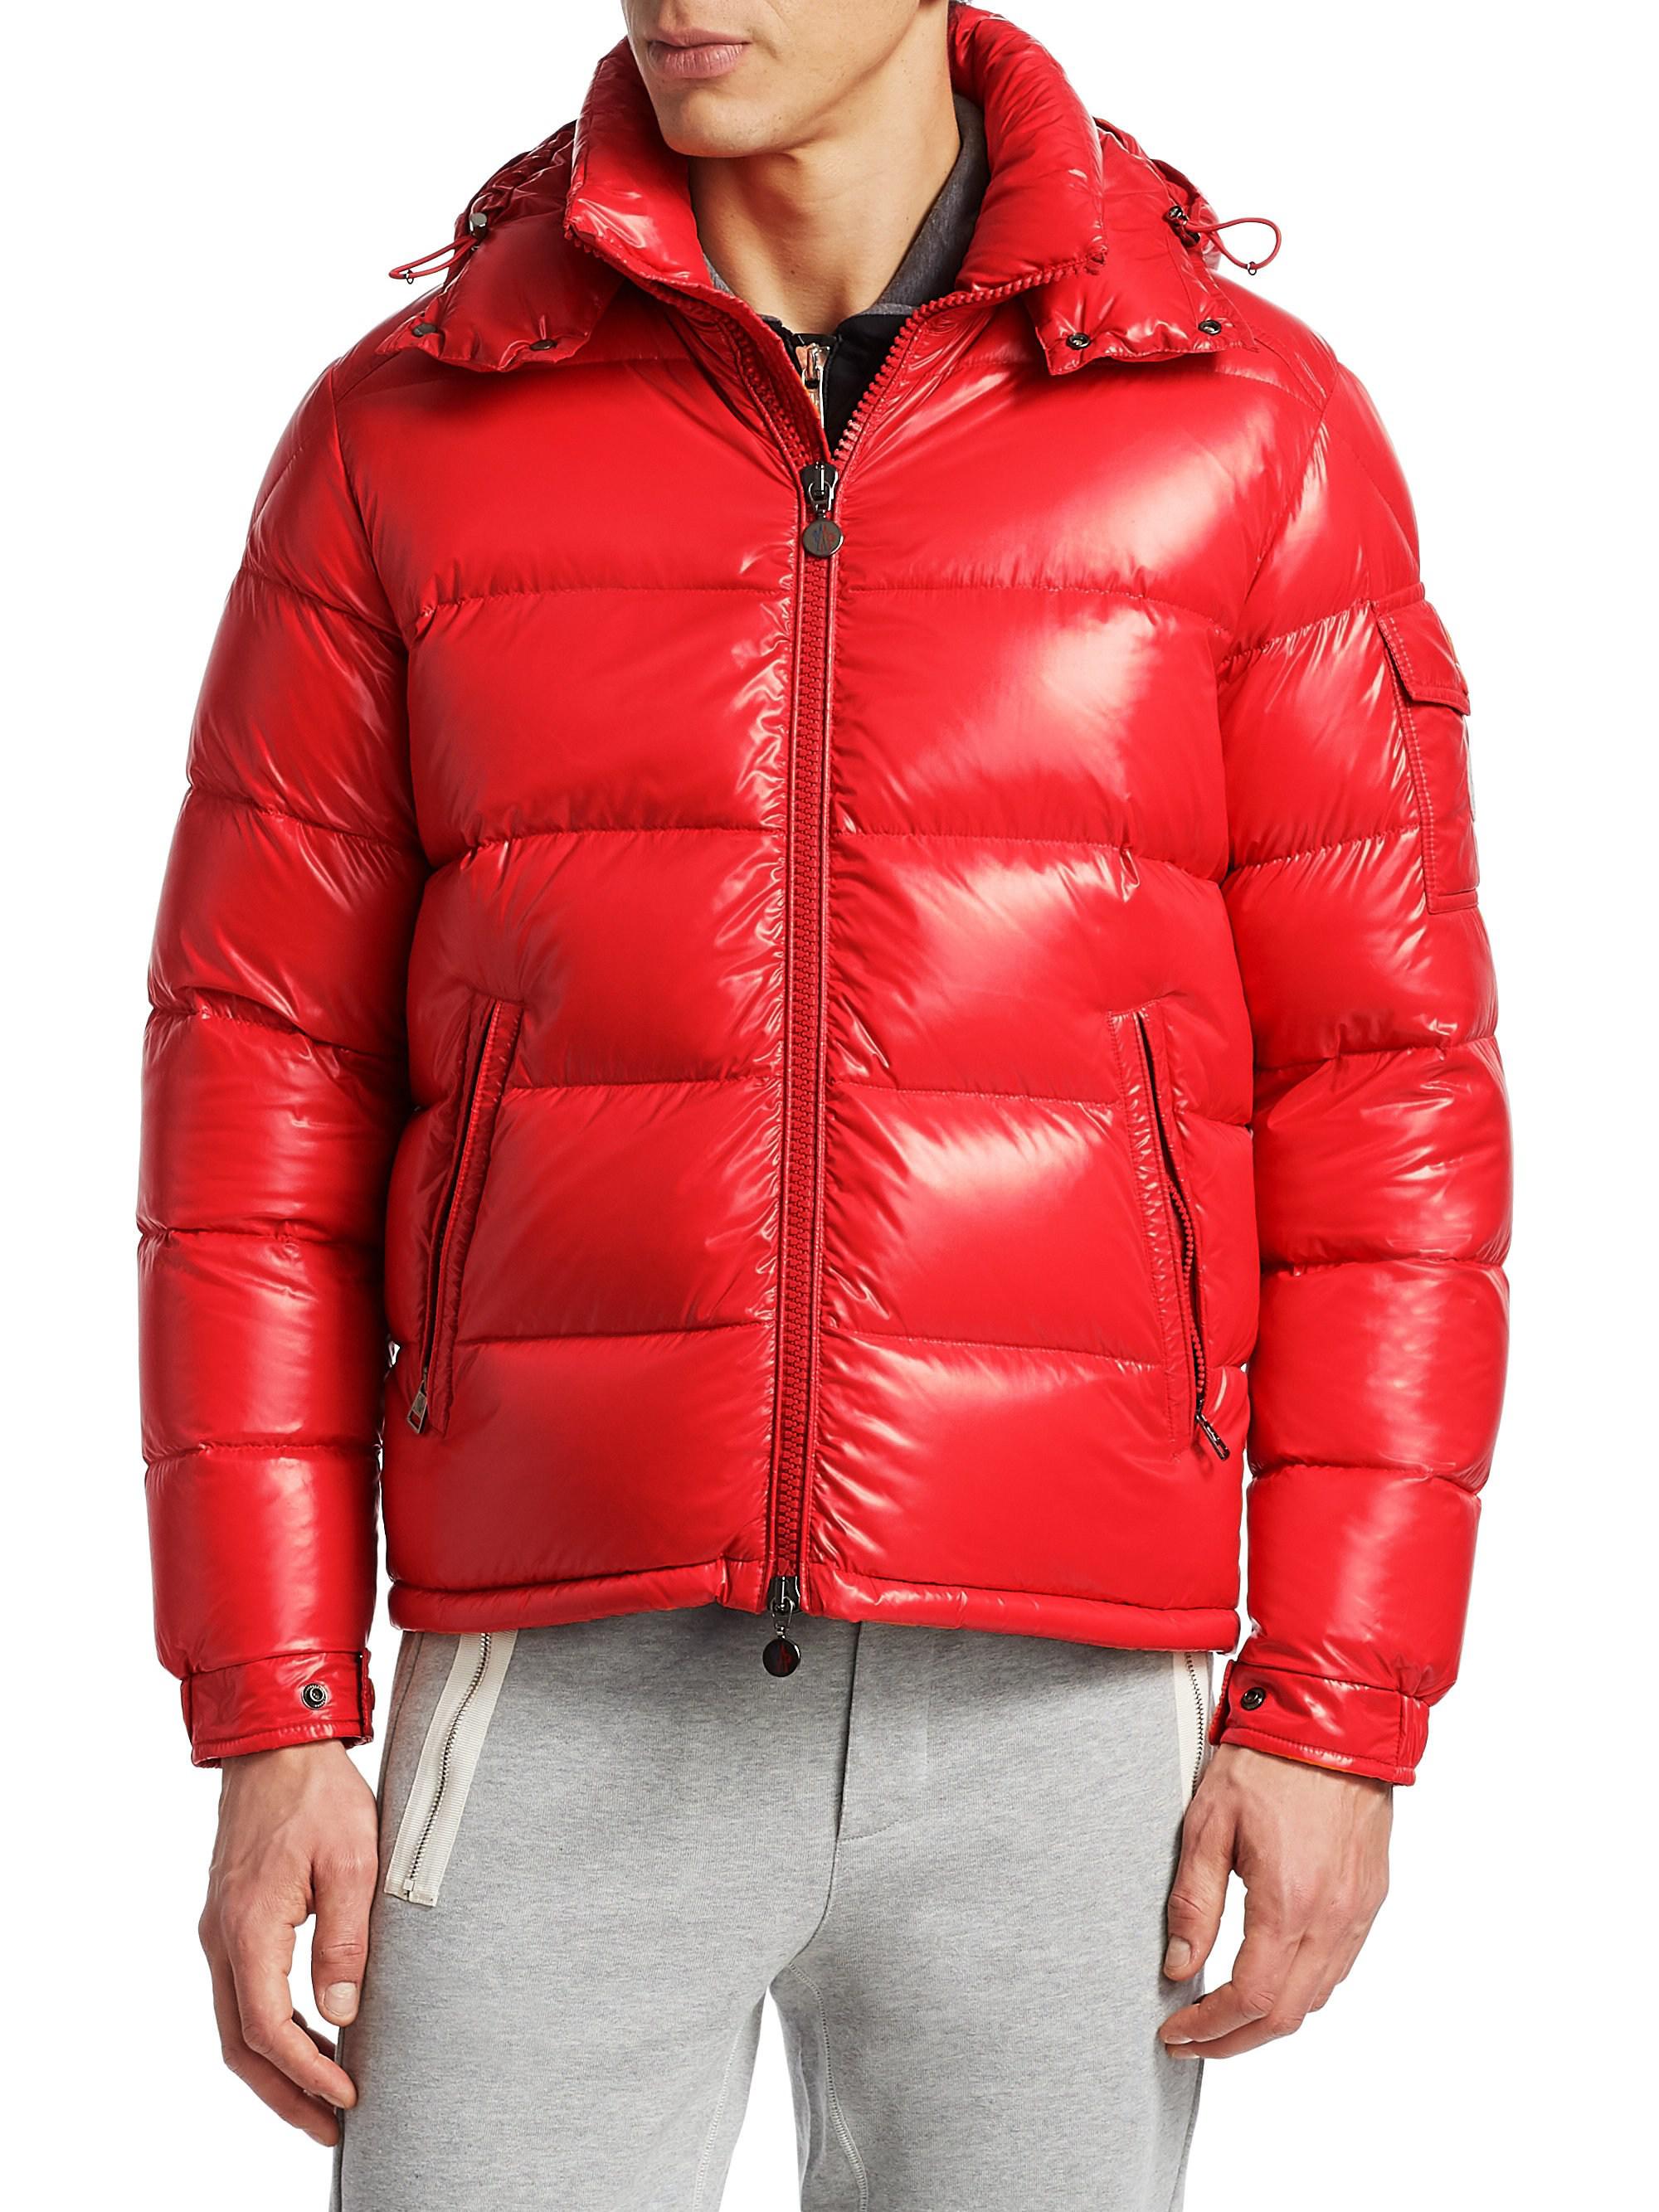 Moncler Synthetic Maya Hooded Puffer Jacket in Red for Men - Lyst